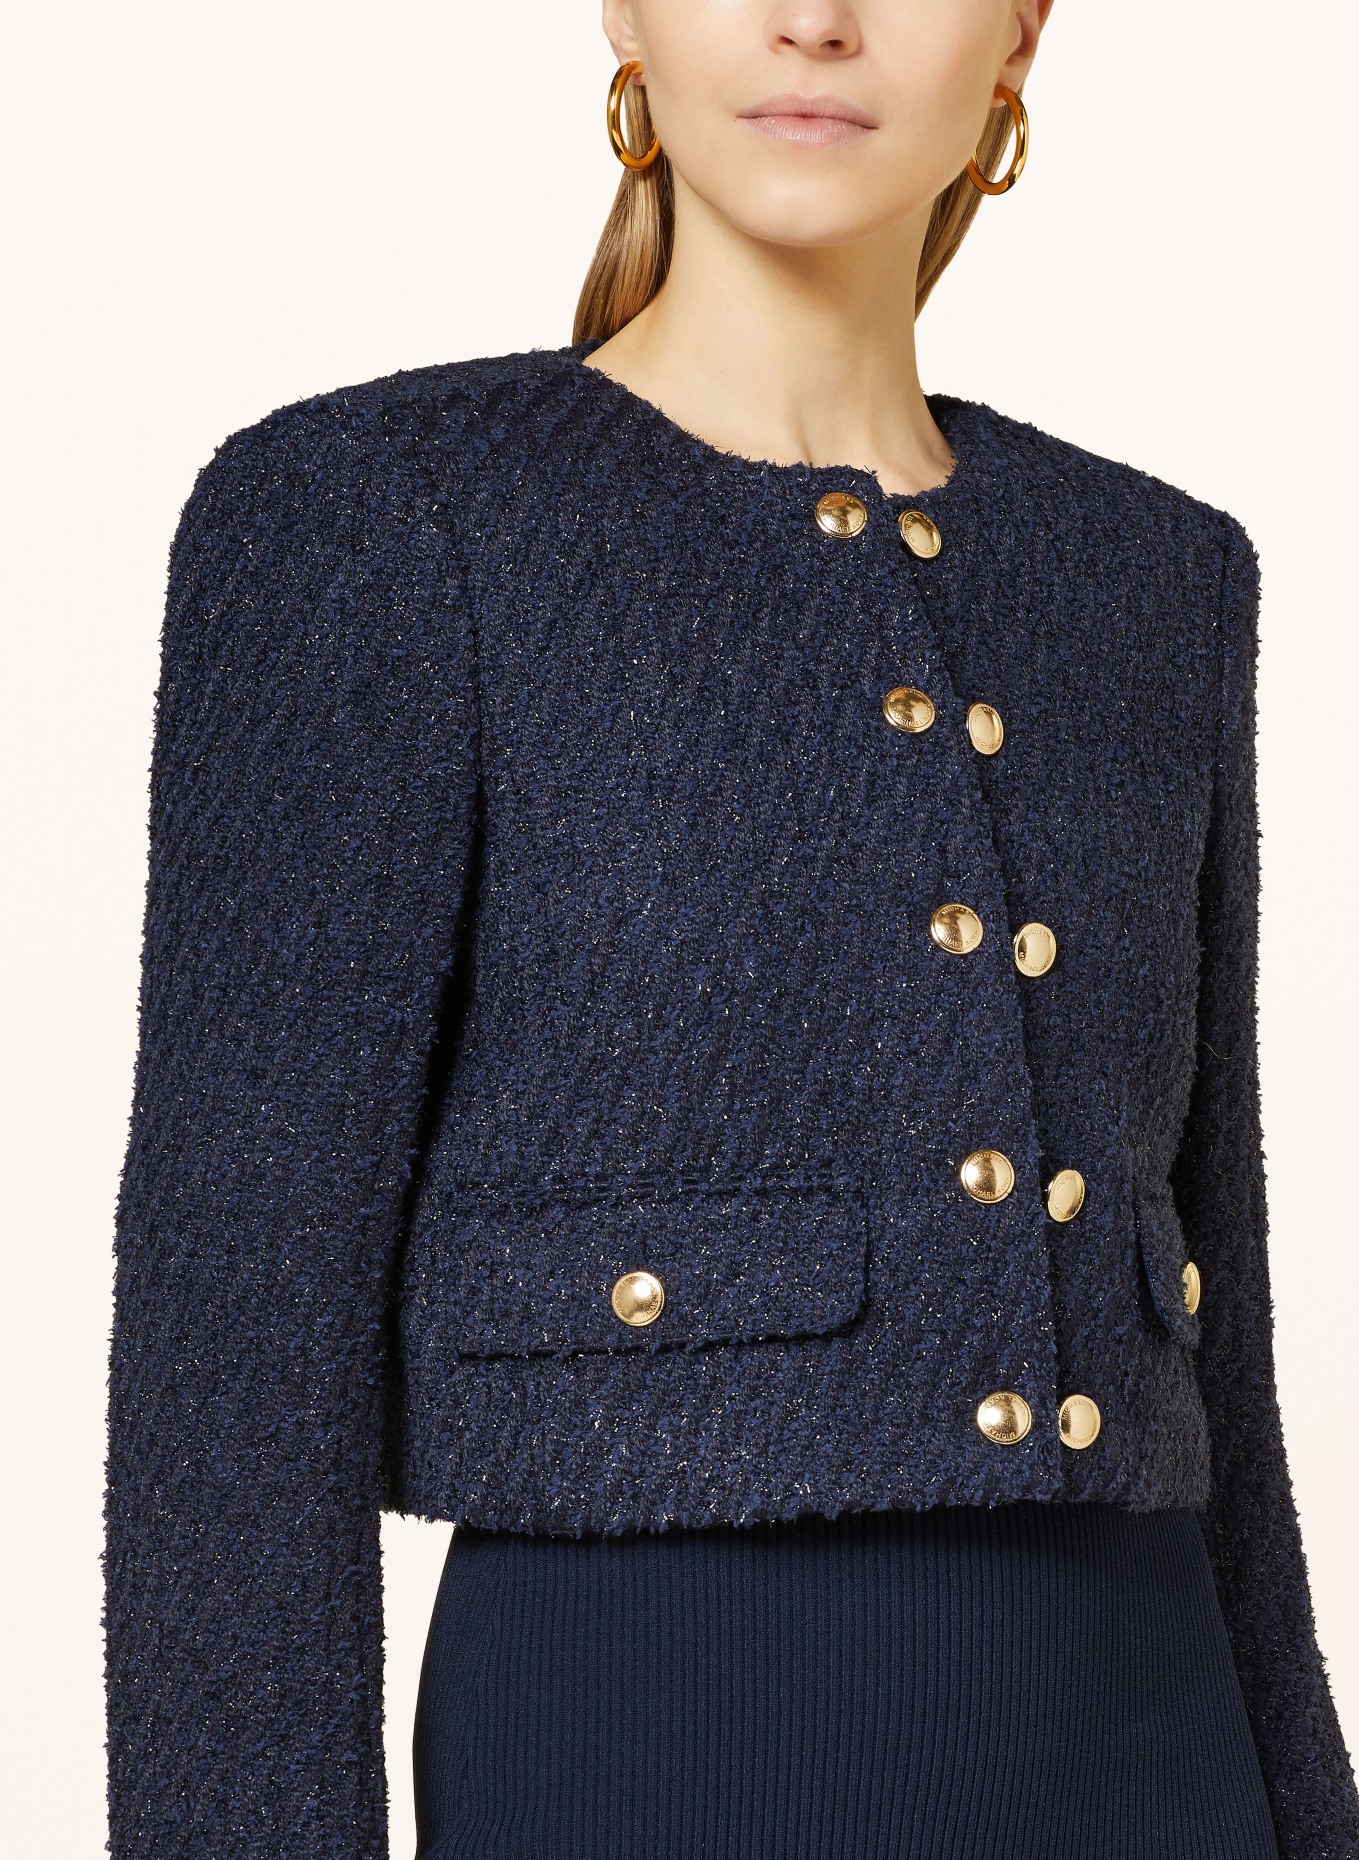 MICHAEL KORS Boxy jacket made of tweed with glitter thread, Color: DARK BLUE (Image 4)